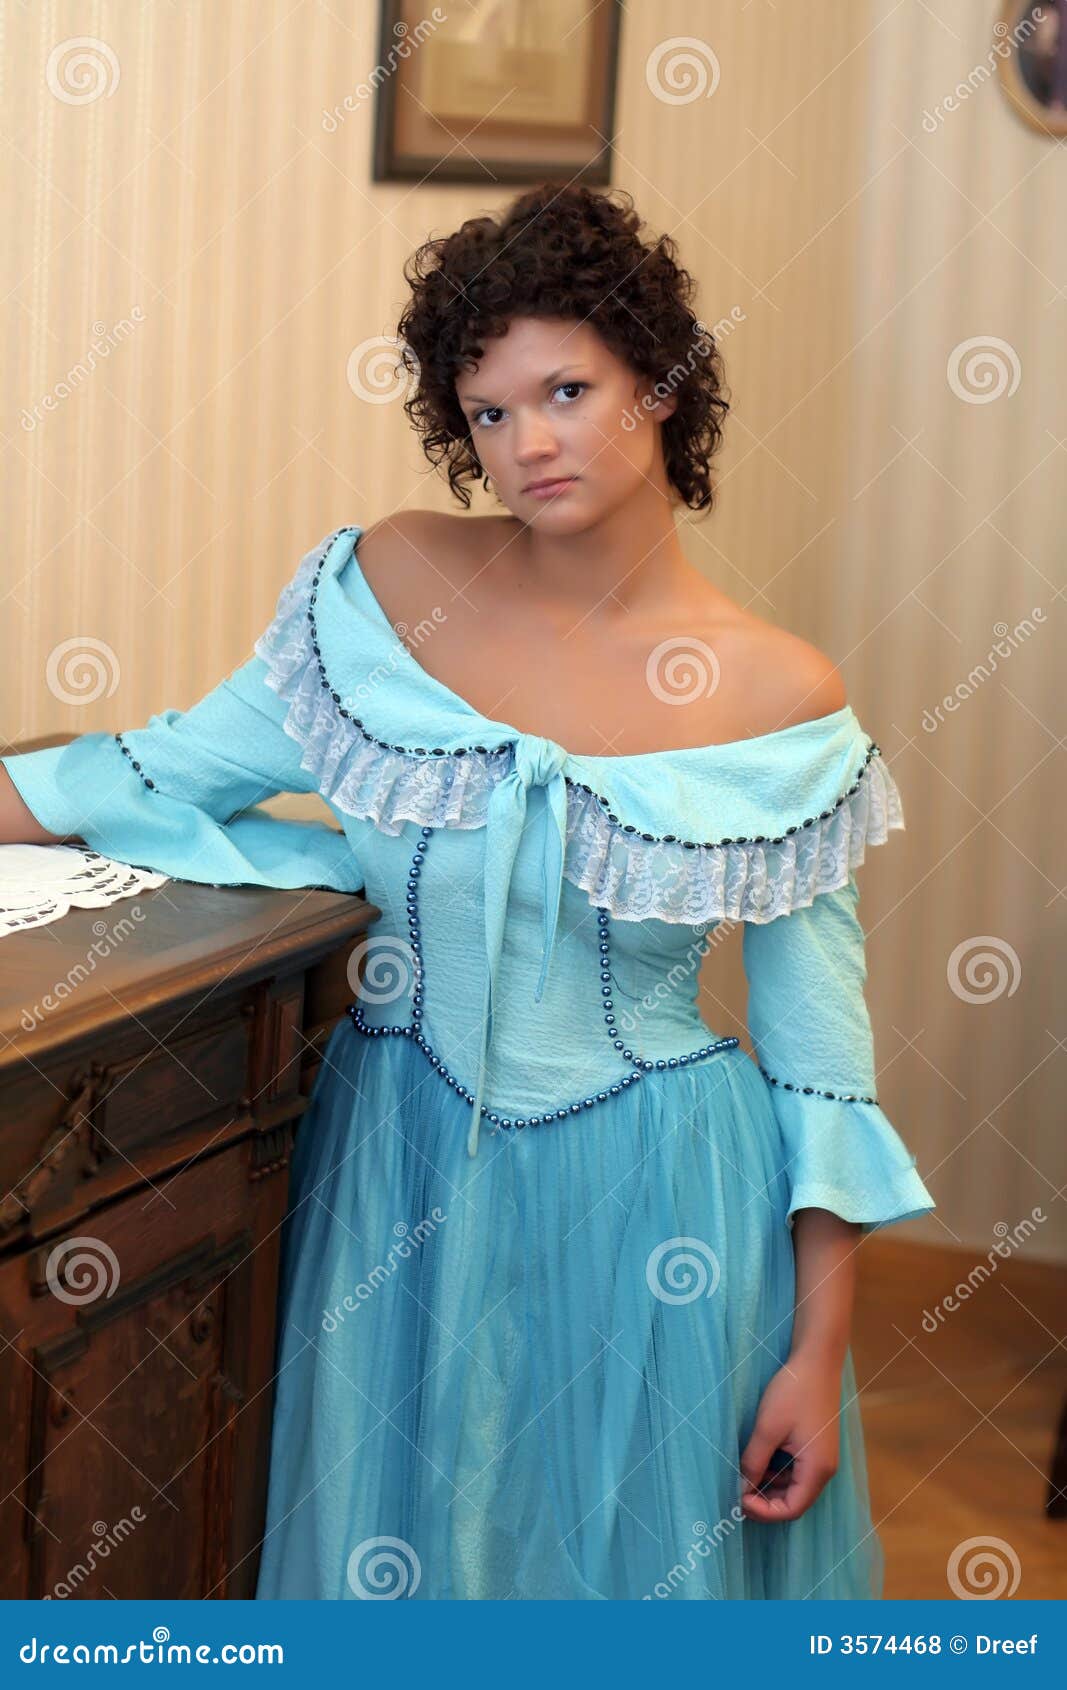 Girl in fancy dress stock photo. Image of alone, gorgeous - 3574468